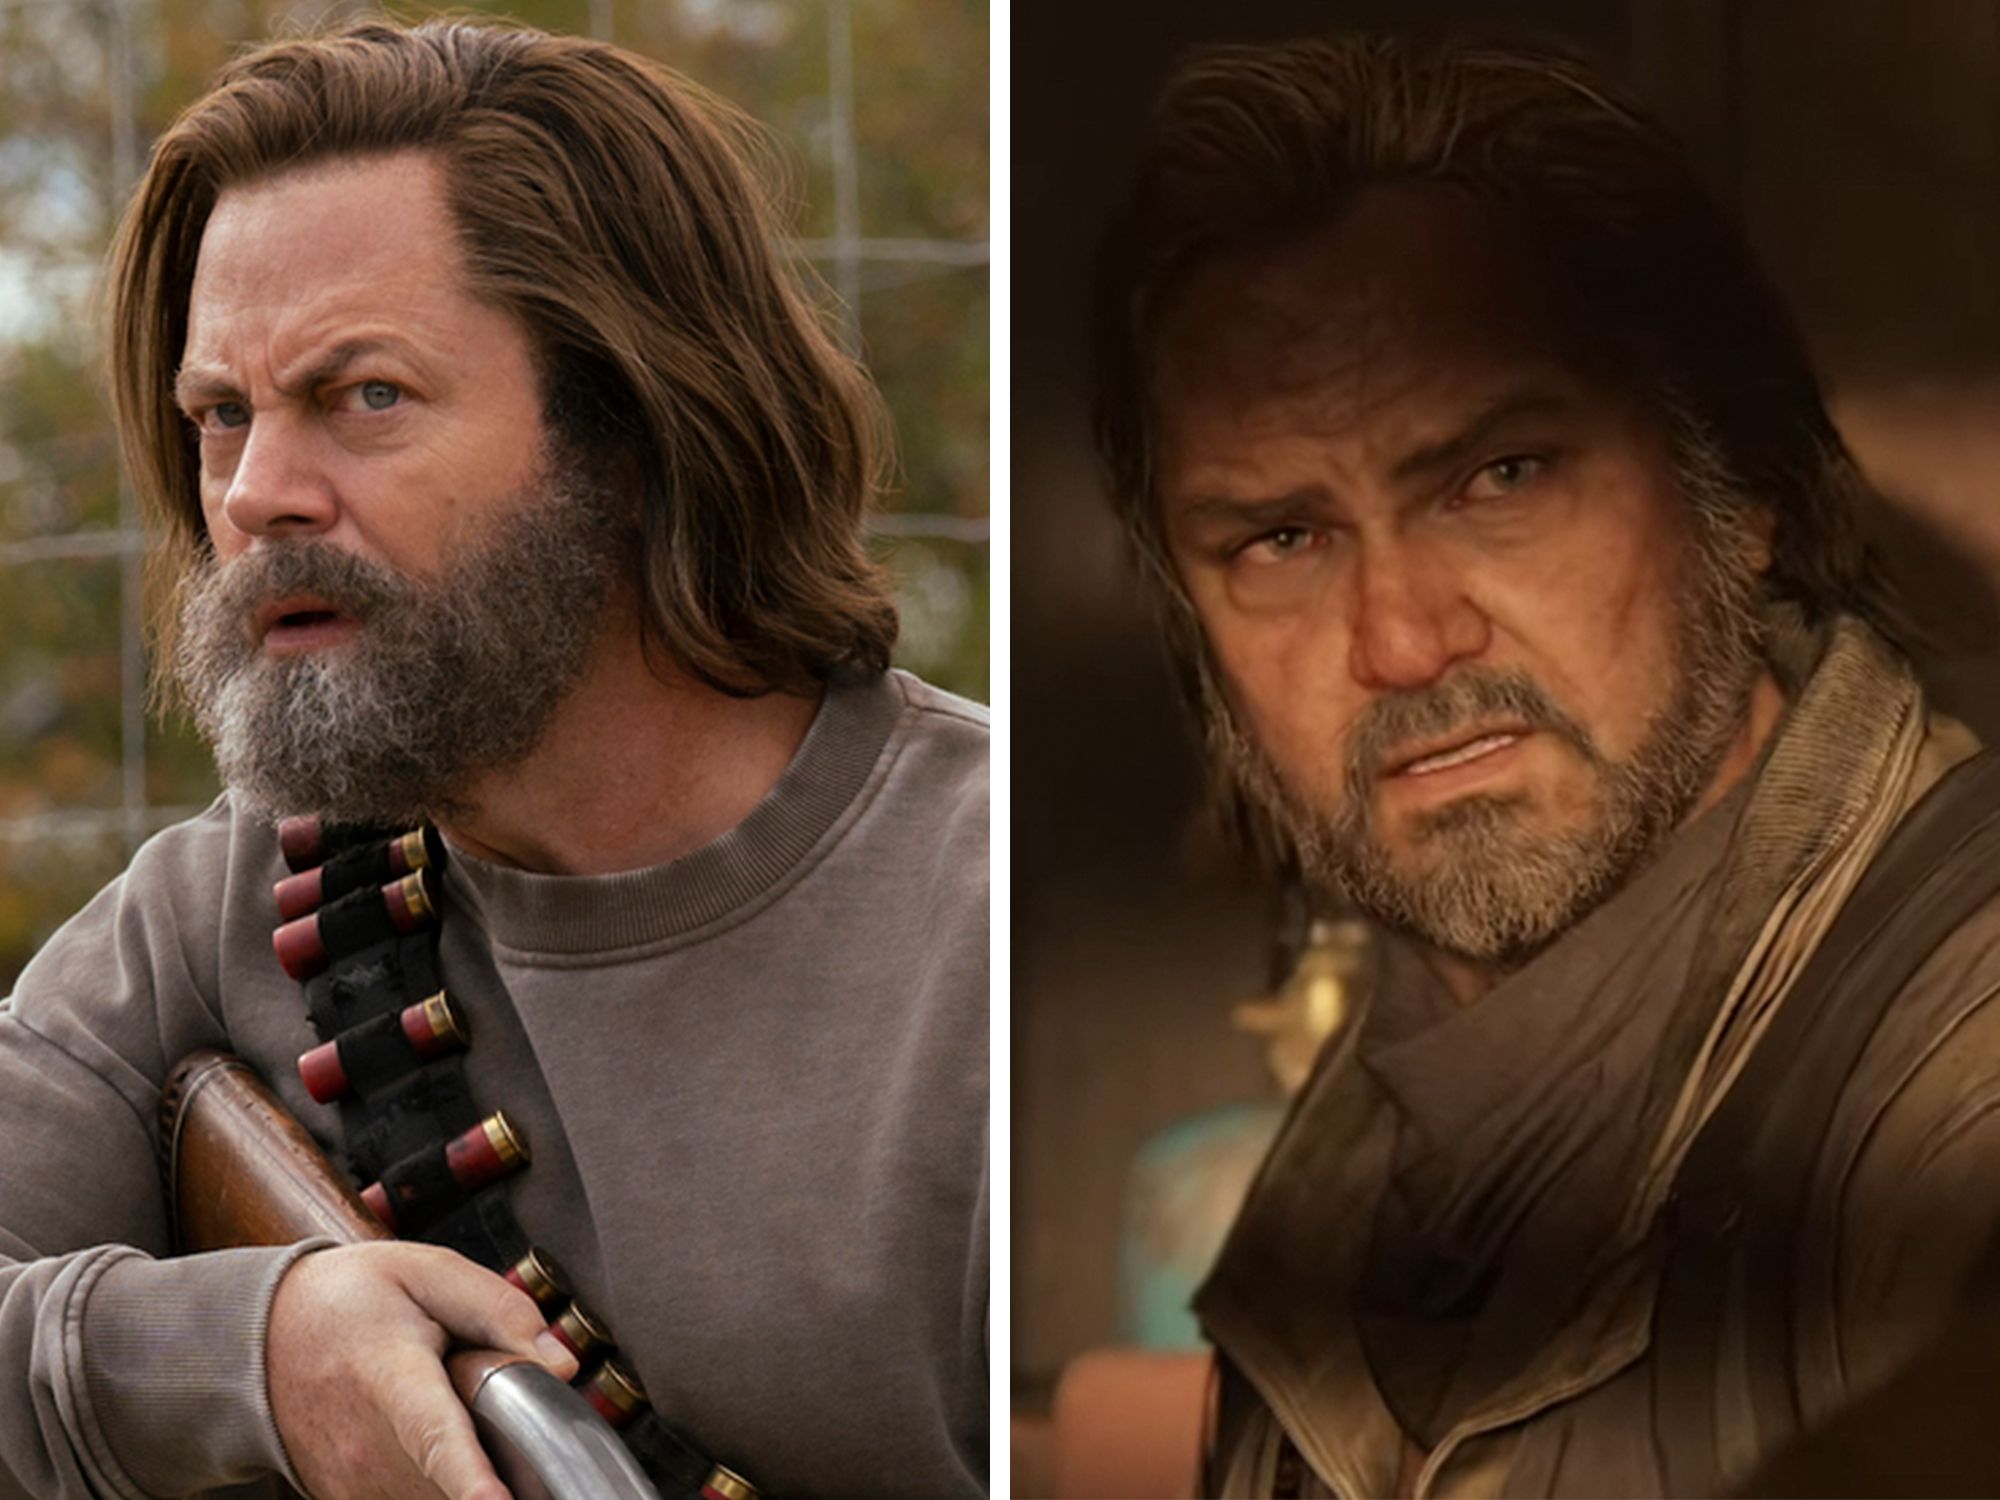 How the 'Last of Us' Game Compares to HBO TV Series